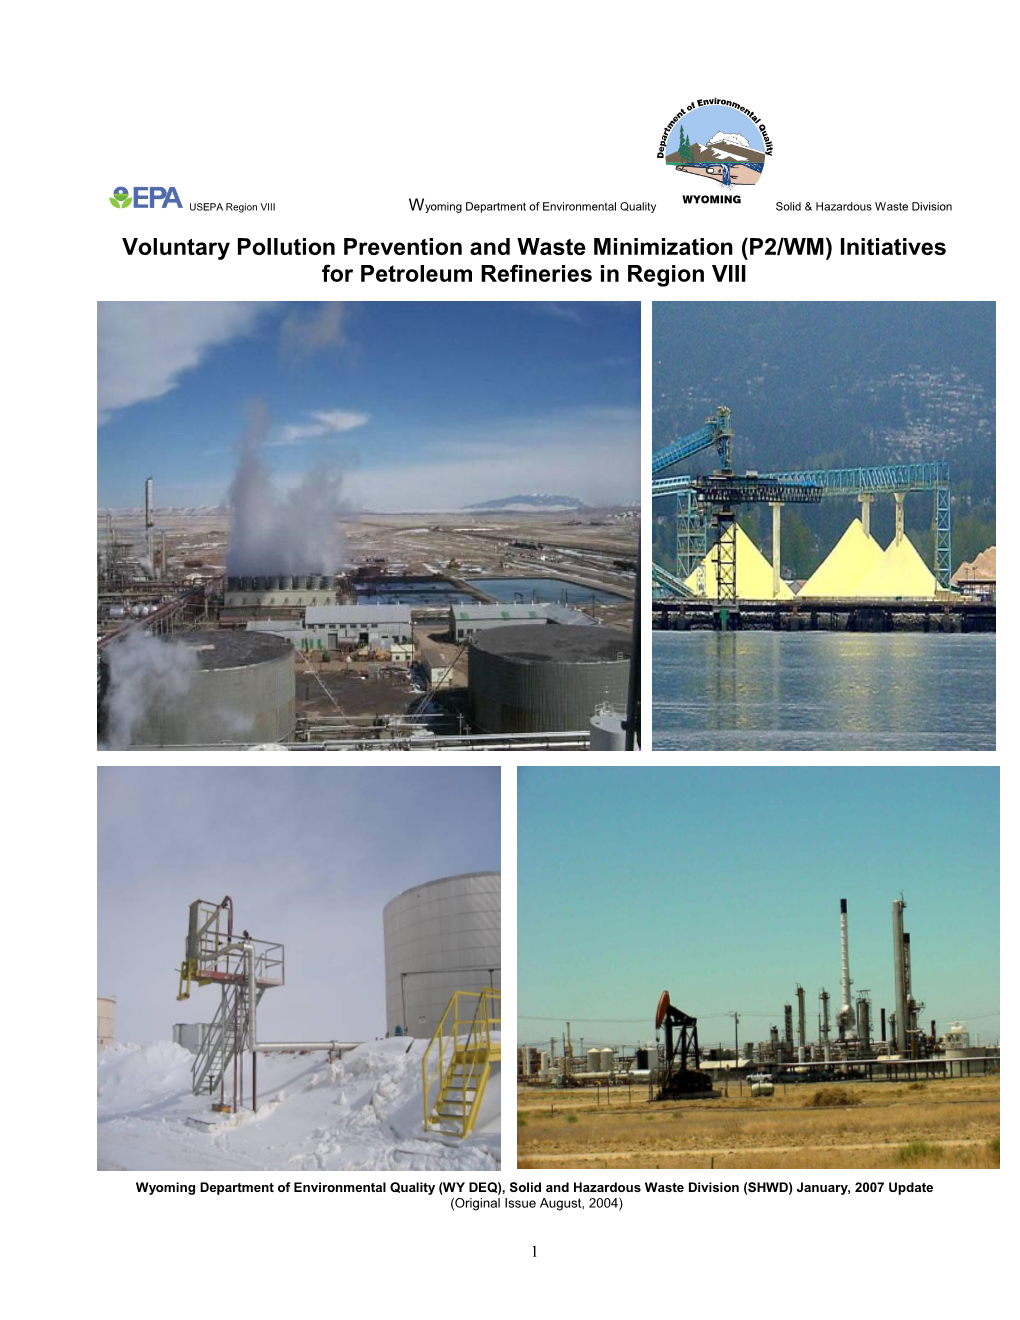 Development of Pollution Prevention and Waste Minimization Profiles